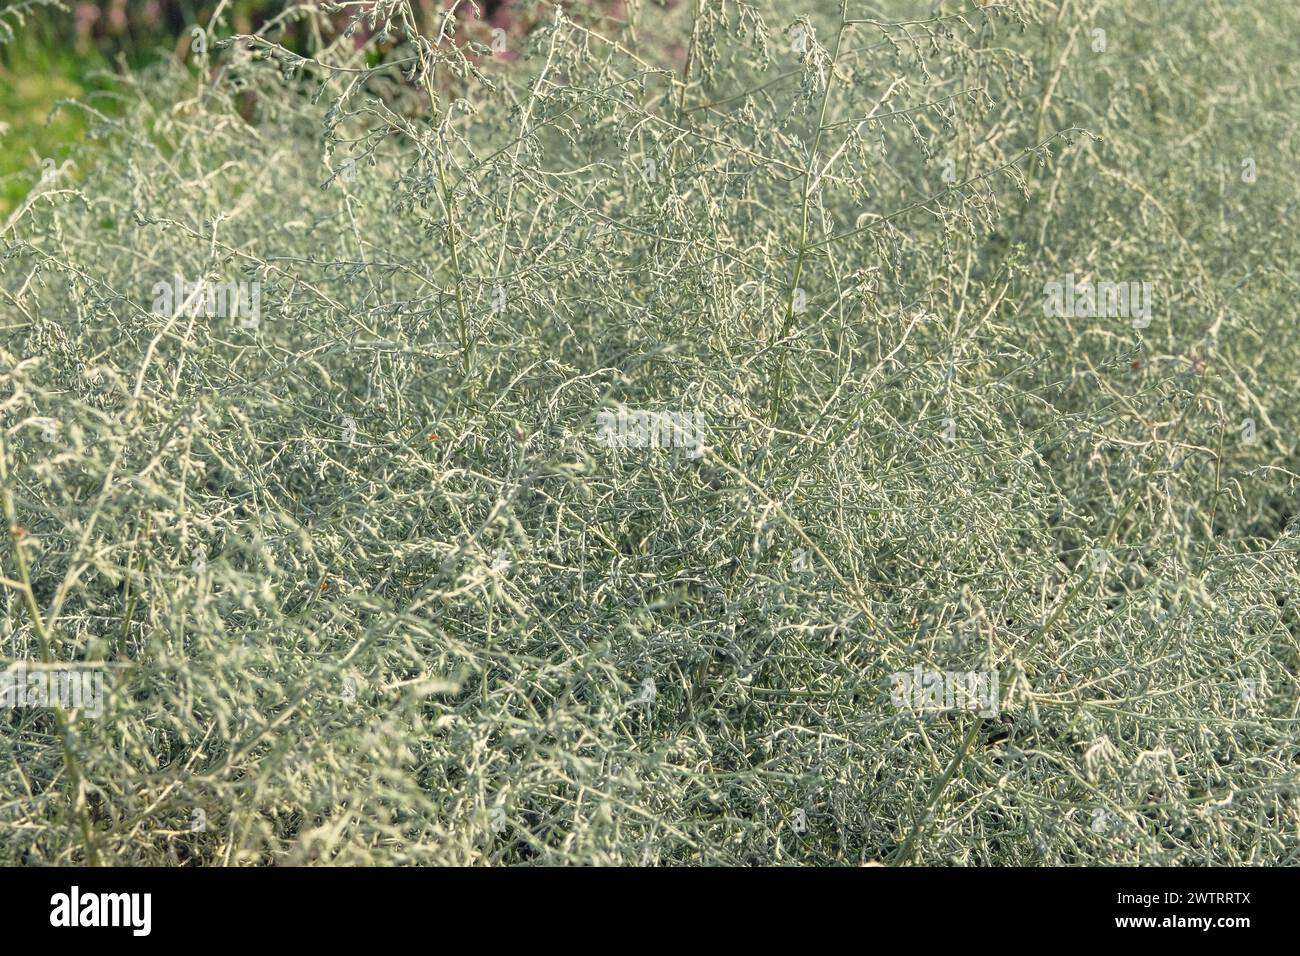 Asparagus albus grow in garden. Evergreen plant is growing outdoors. Farming and harvesting. Growing spices for further use. Stock Photo